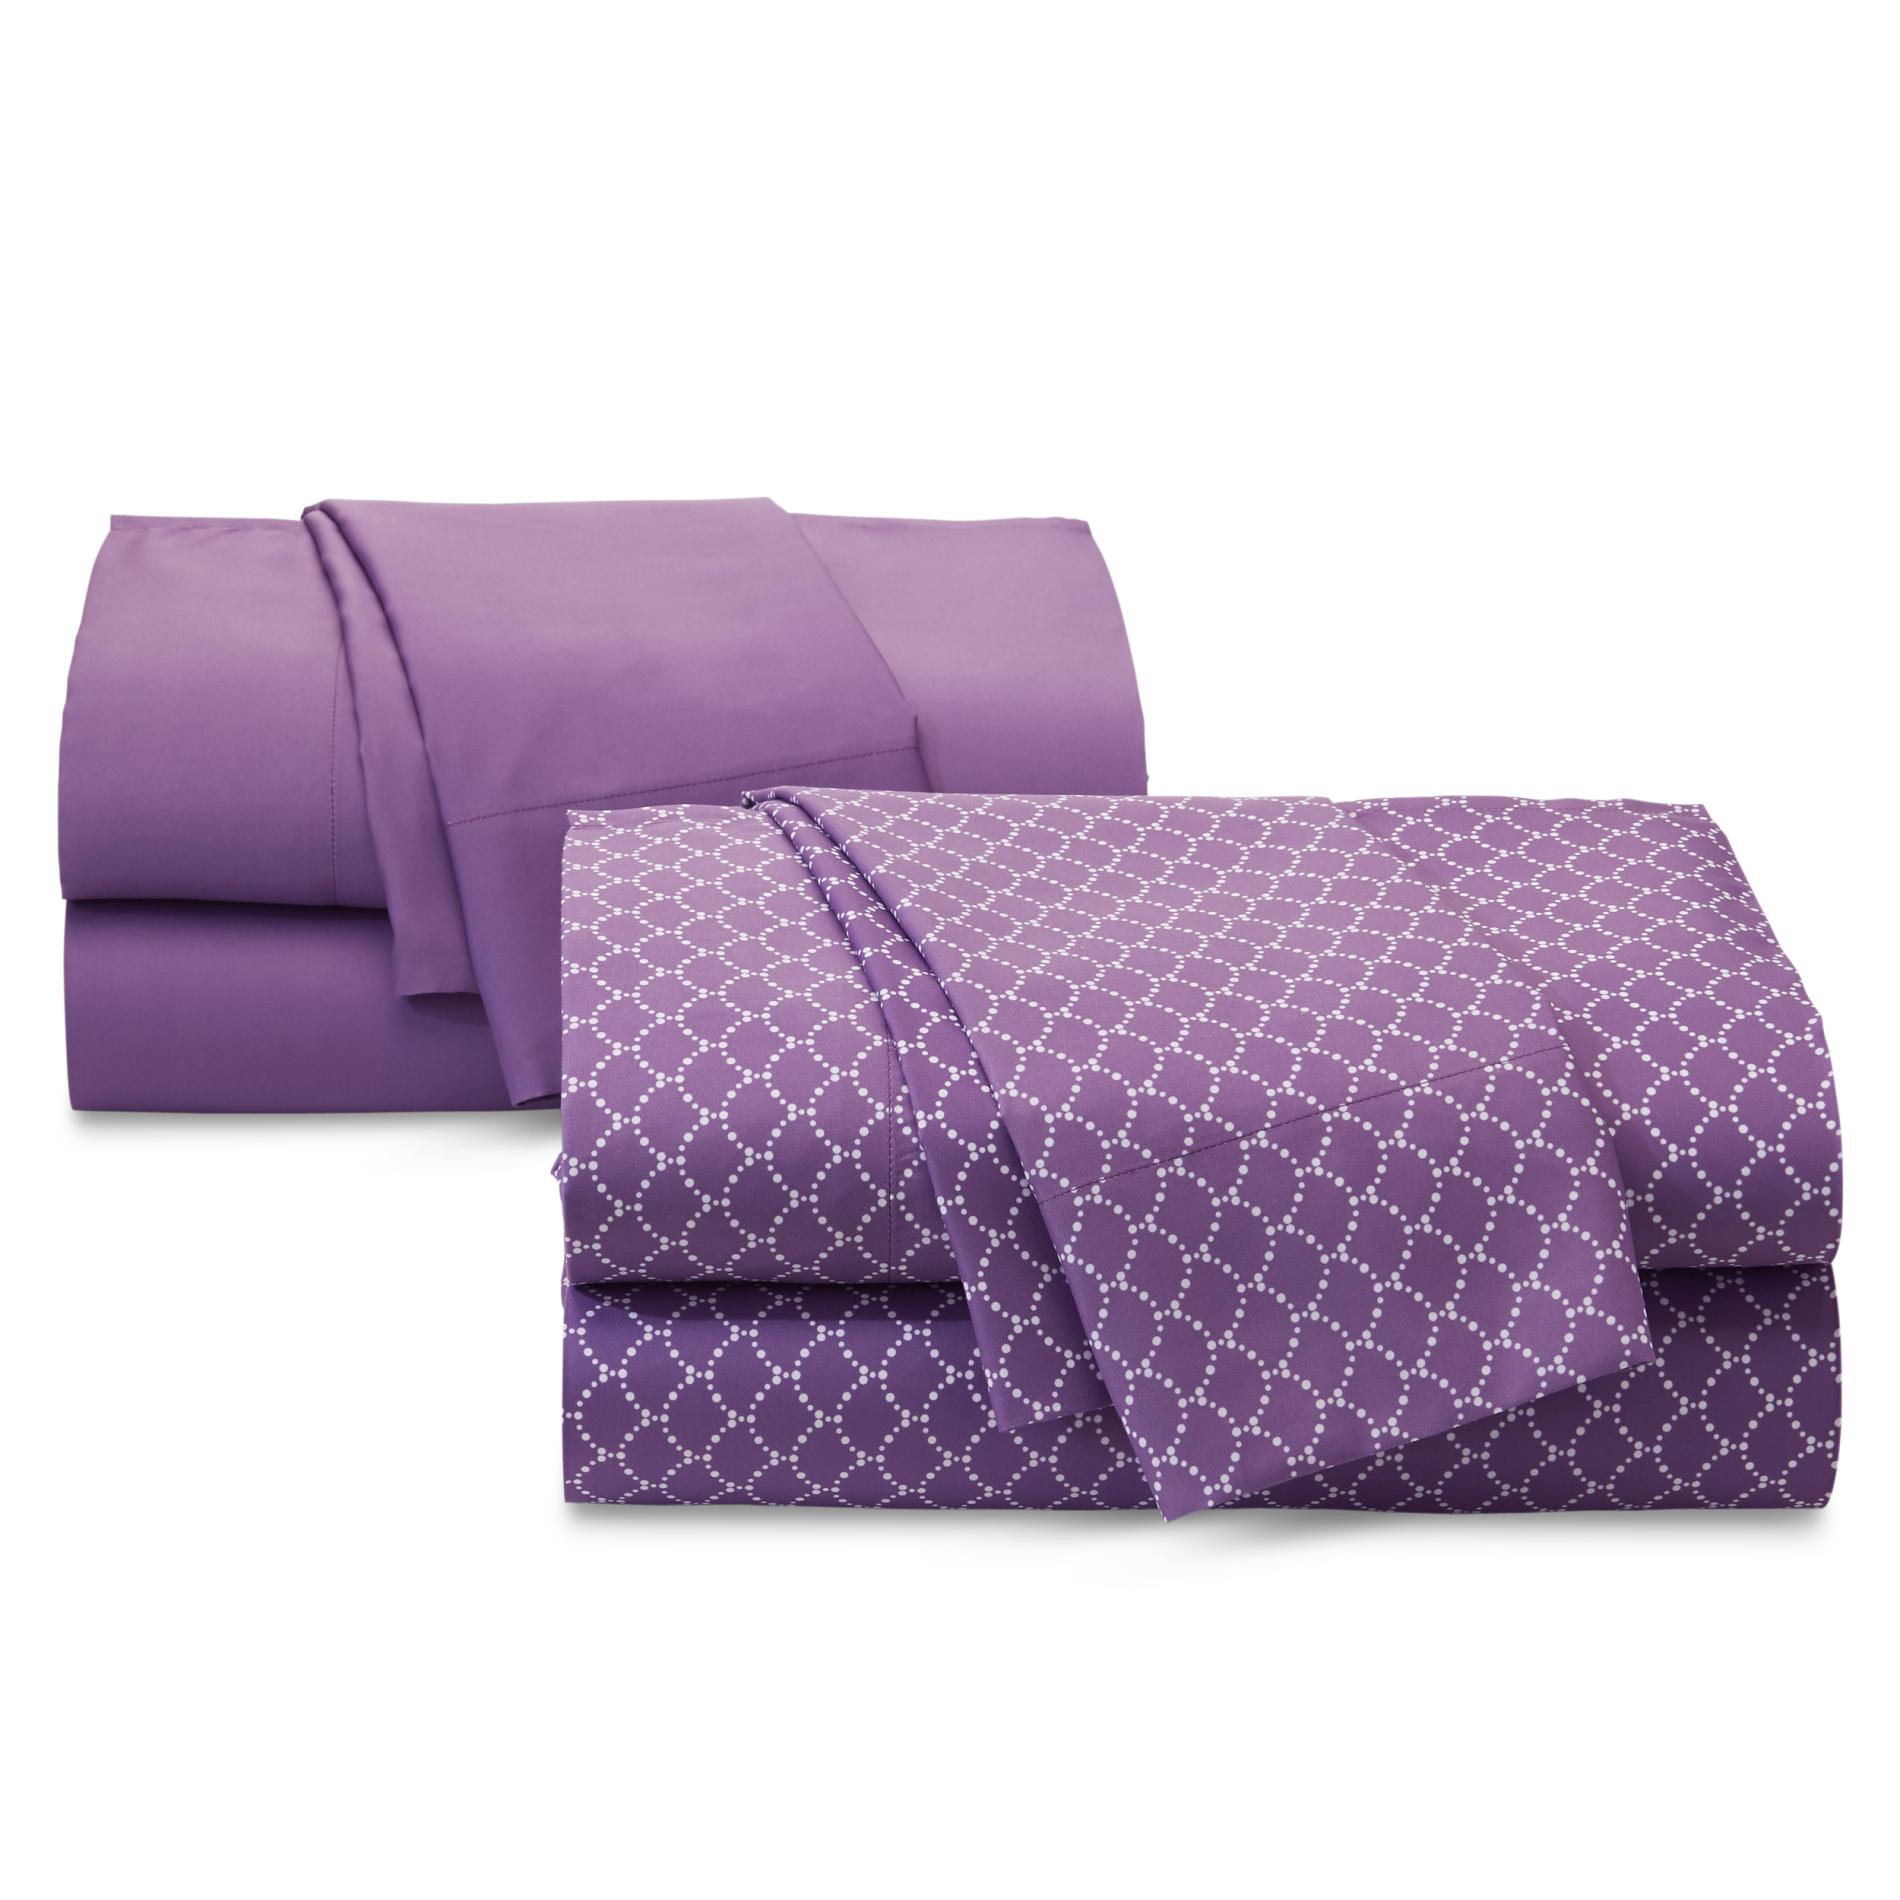 Colormate 2Pack Microfiber Sheet Set Shop Your Way Online Shopping & Earn Points on Tools